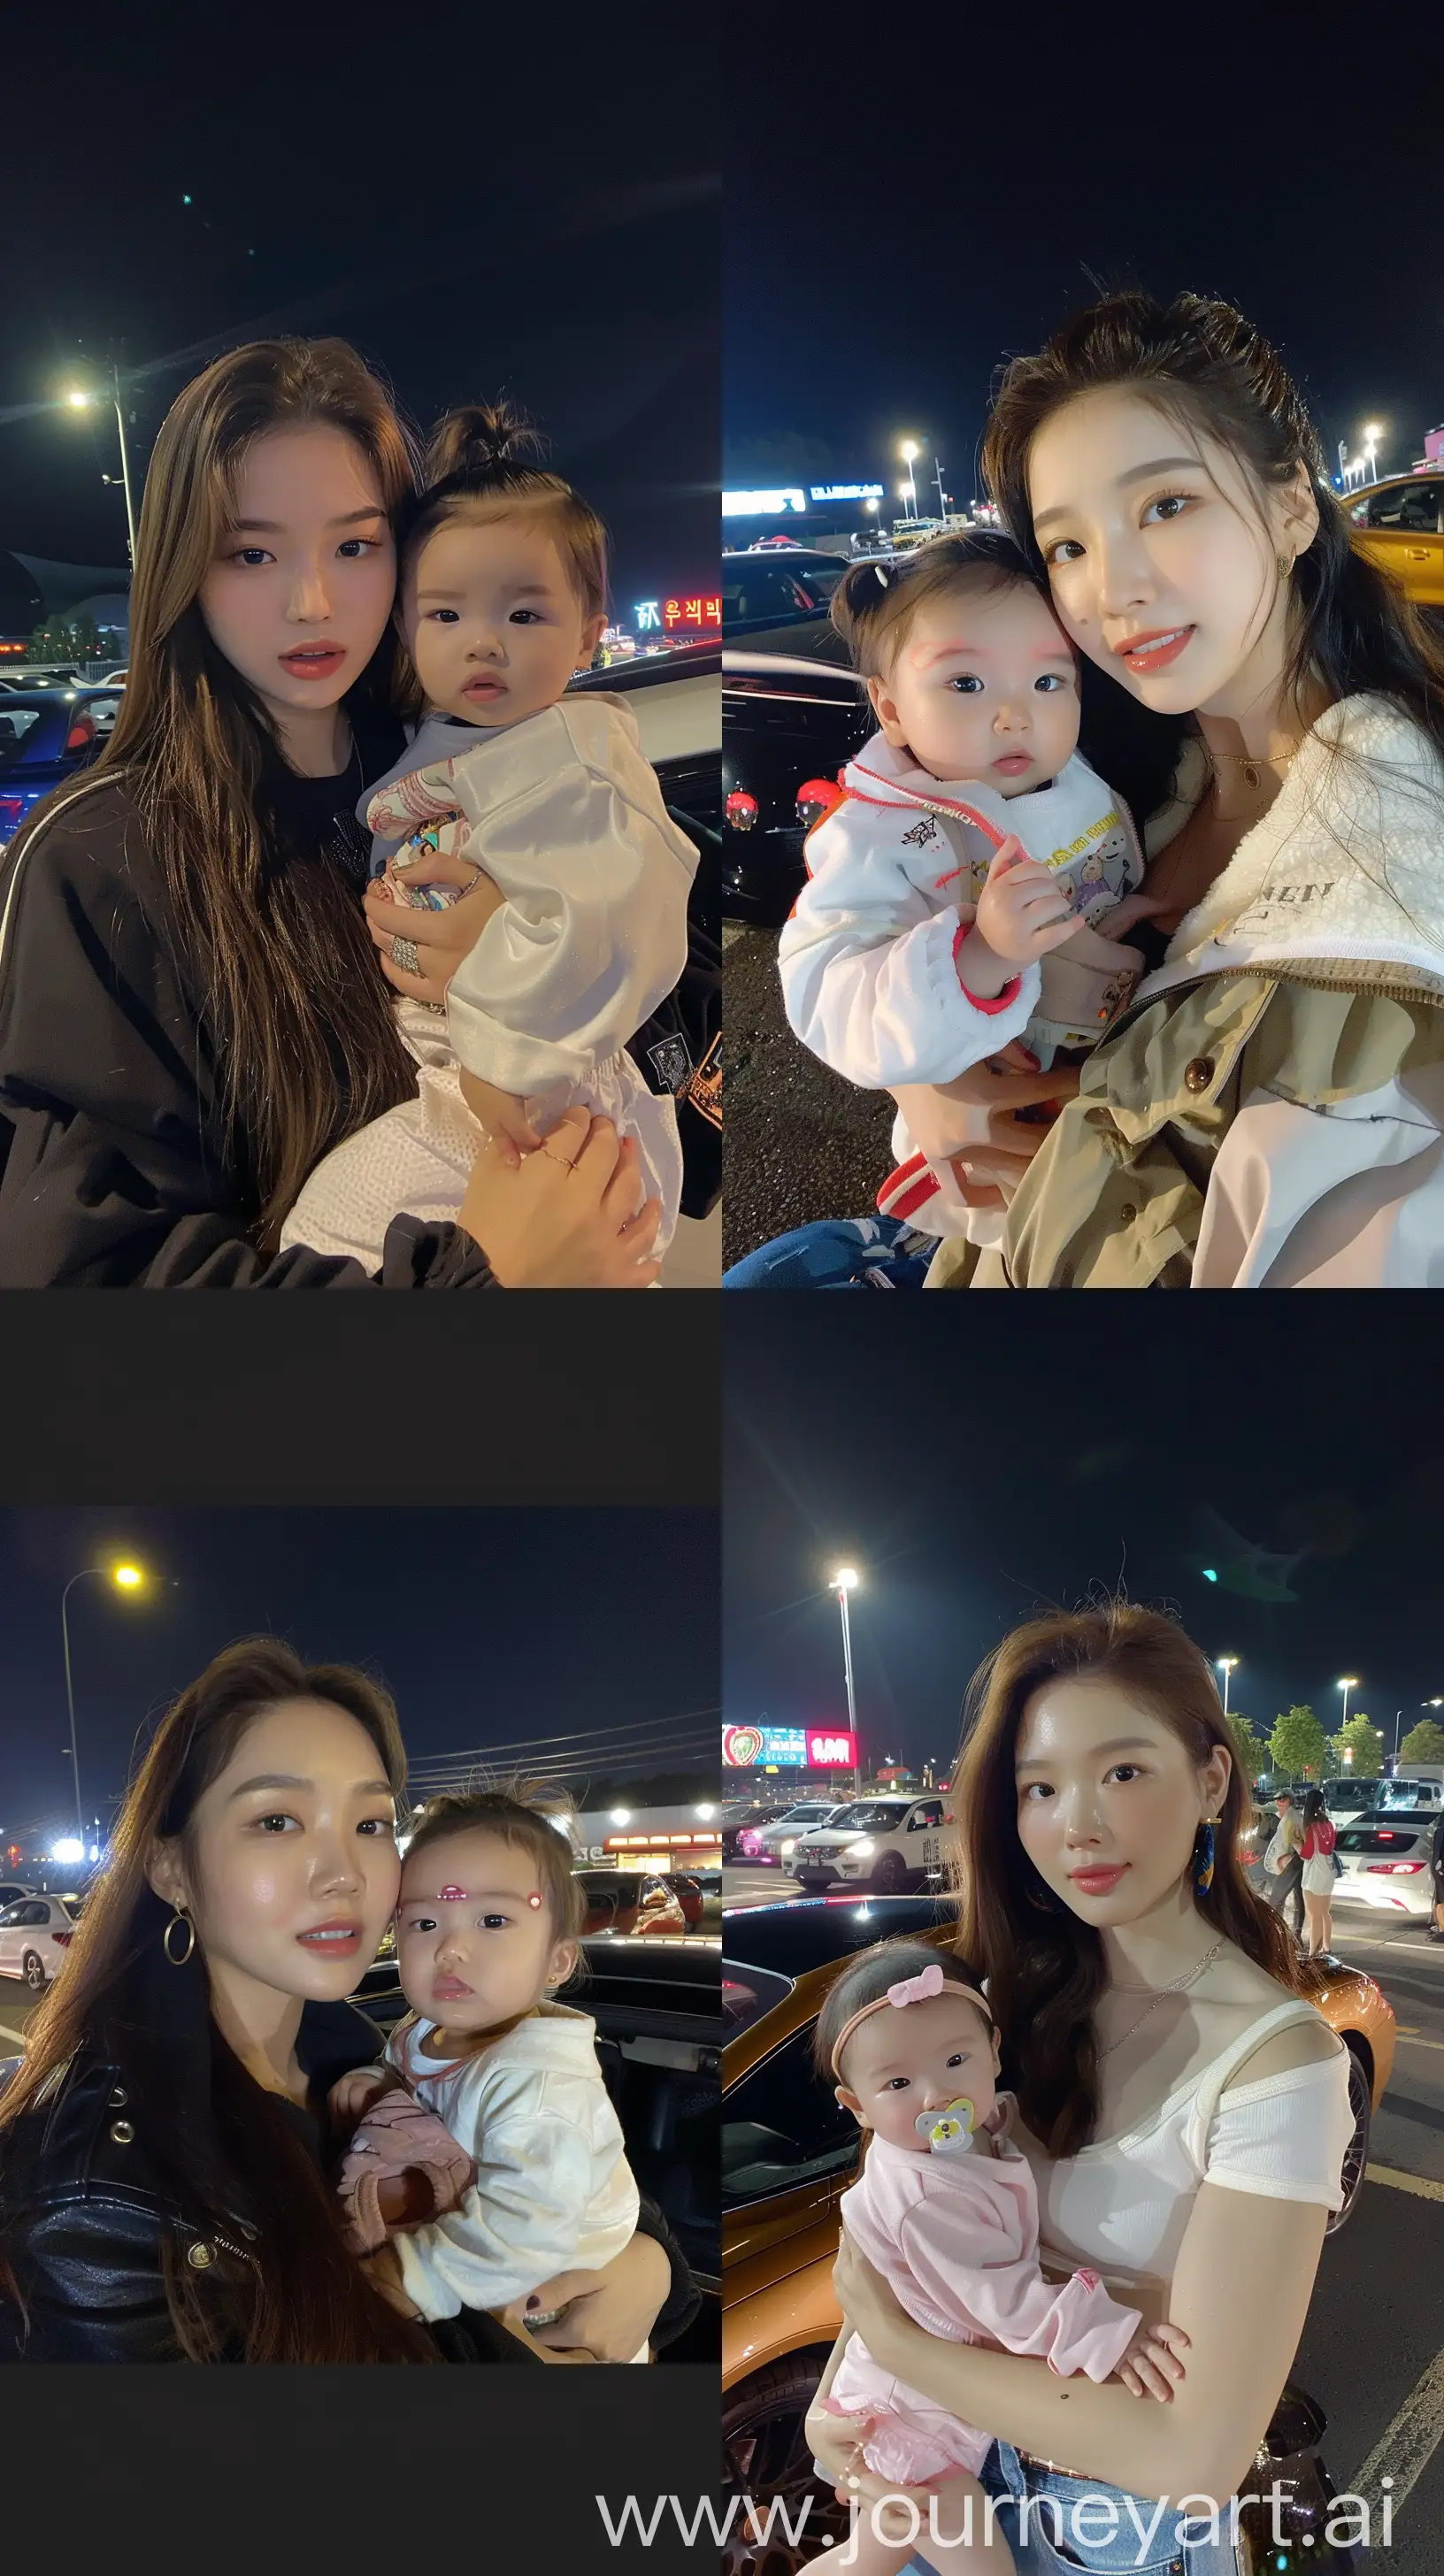 jennie kim holding 2 years old baby girl, facial feature look a like jennie kim, aestethic selfie, on a car meet, night times --ar 9:16